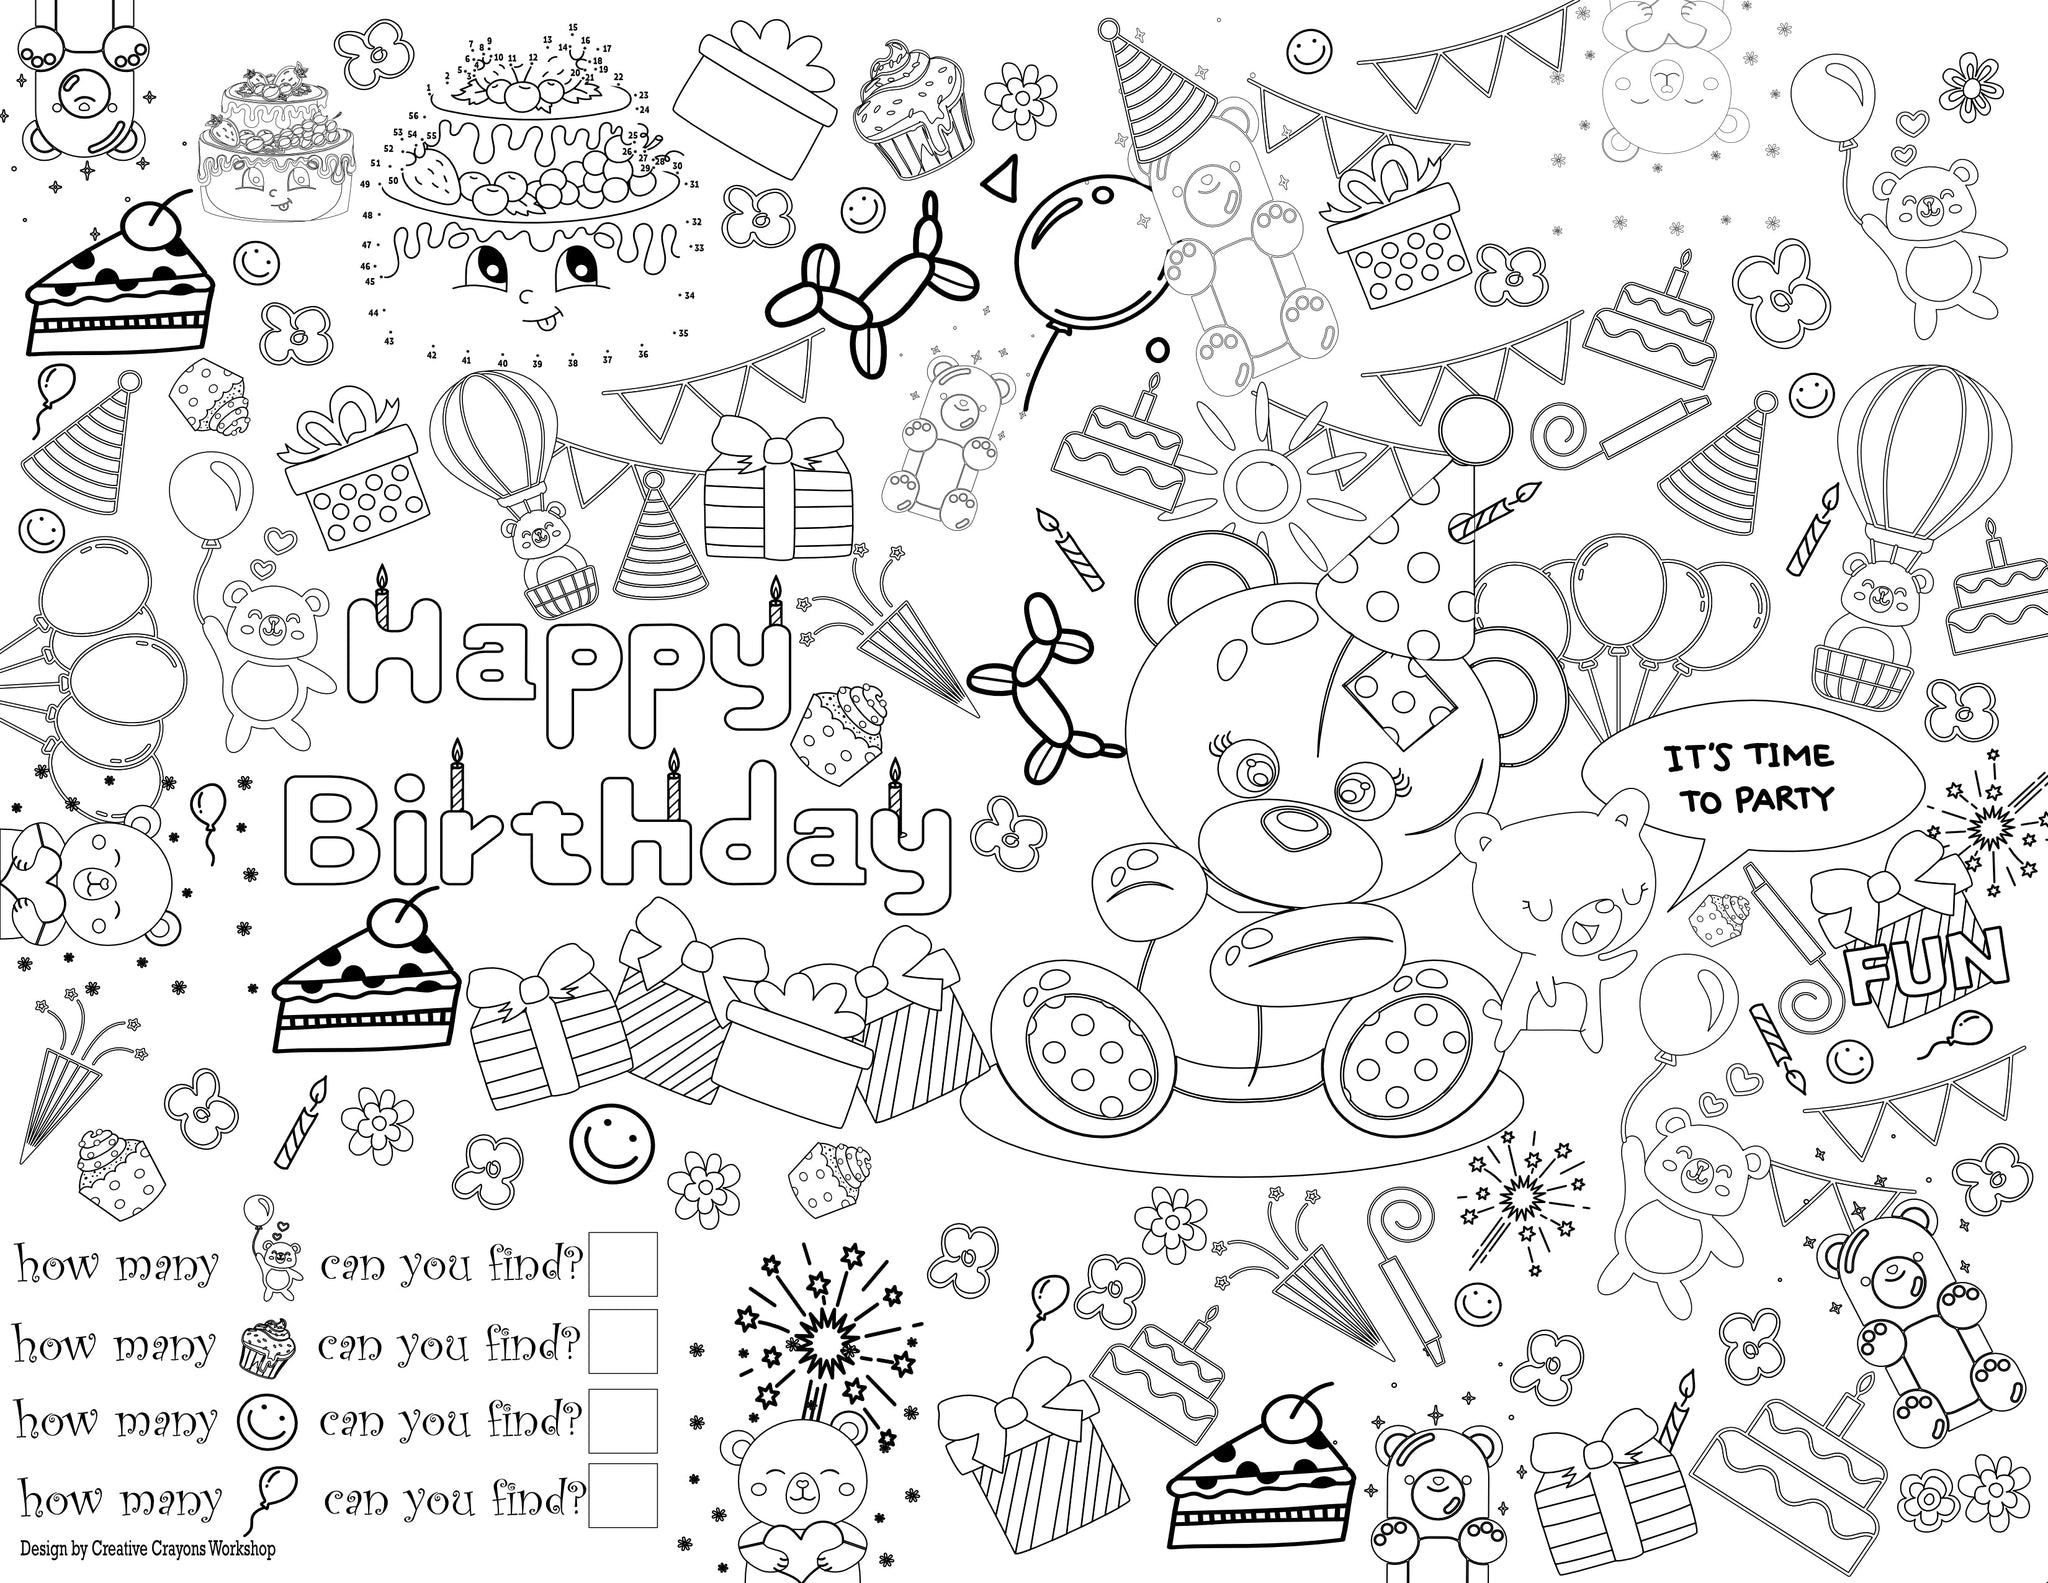 Crayola birthday Party!Coloring Station on a paper covered table  Crayola  birthday party, Crayon birthday parties, Crayola coloring pages